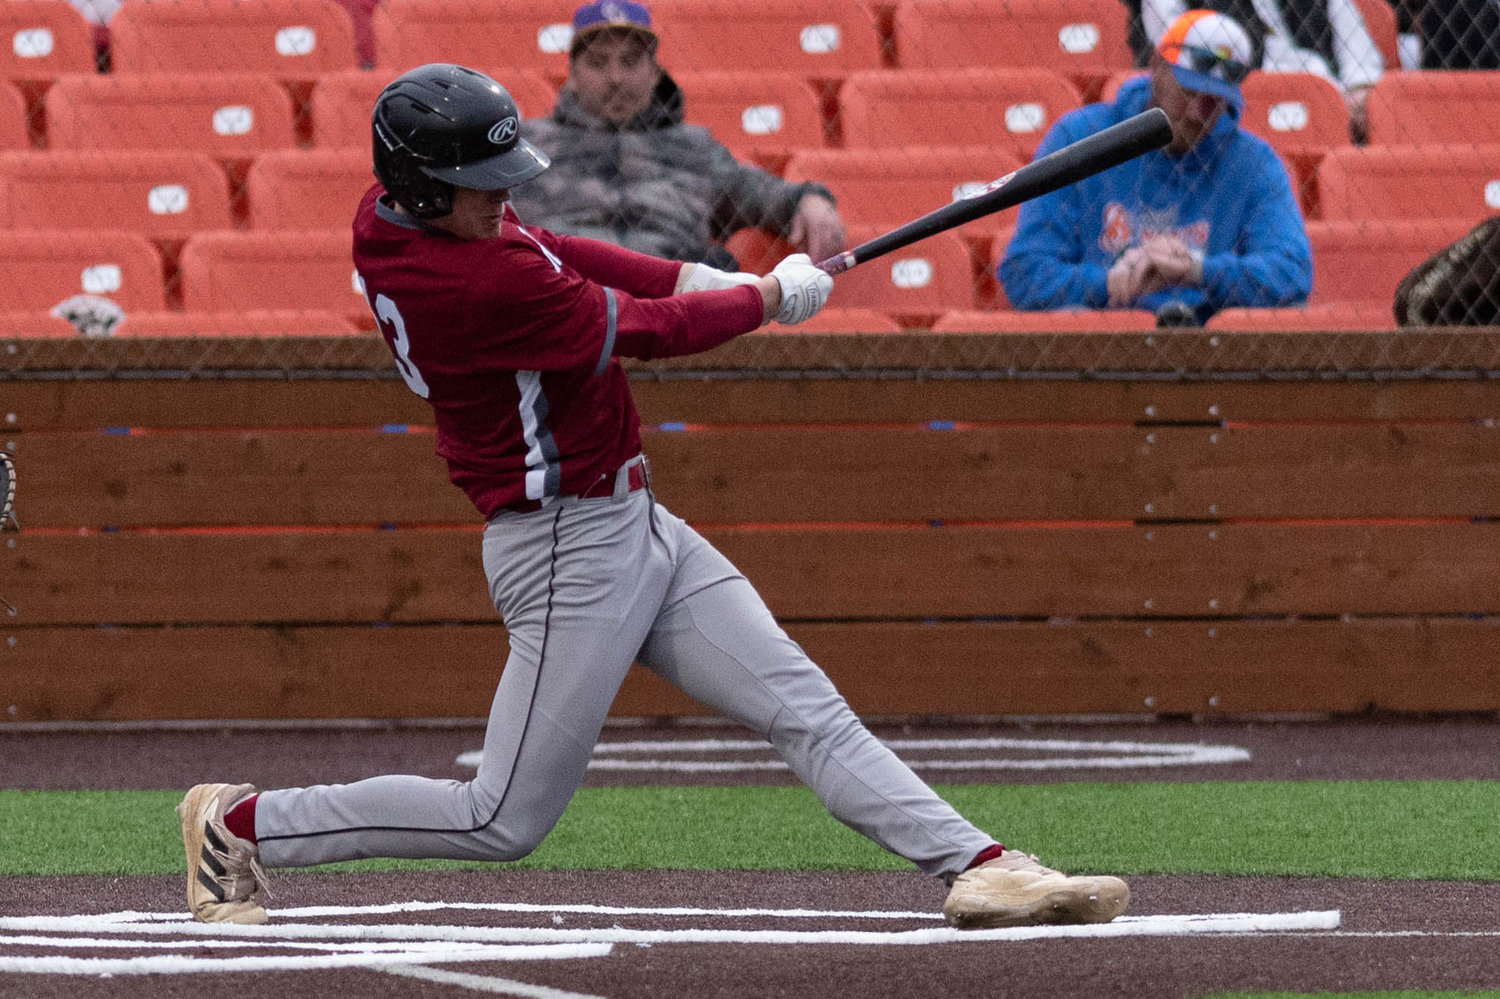 W.F. West's Gavin Fugate swings at a pitch against Columbia River in the 2A District 4 semifinals May 11 at Ridgefield.